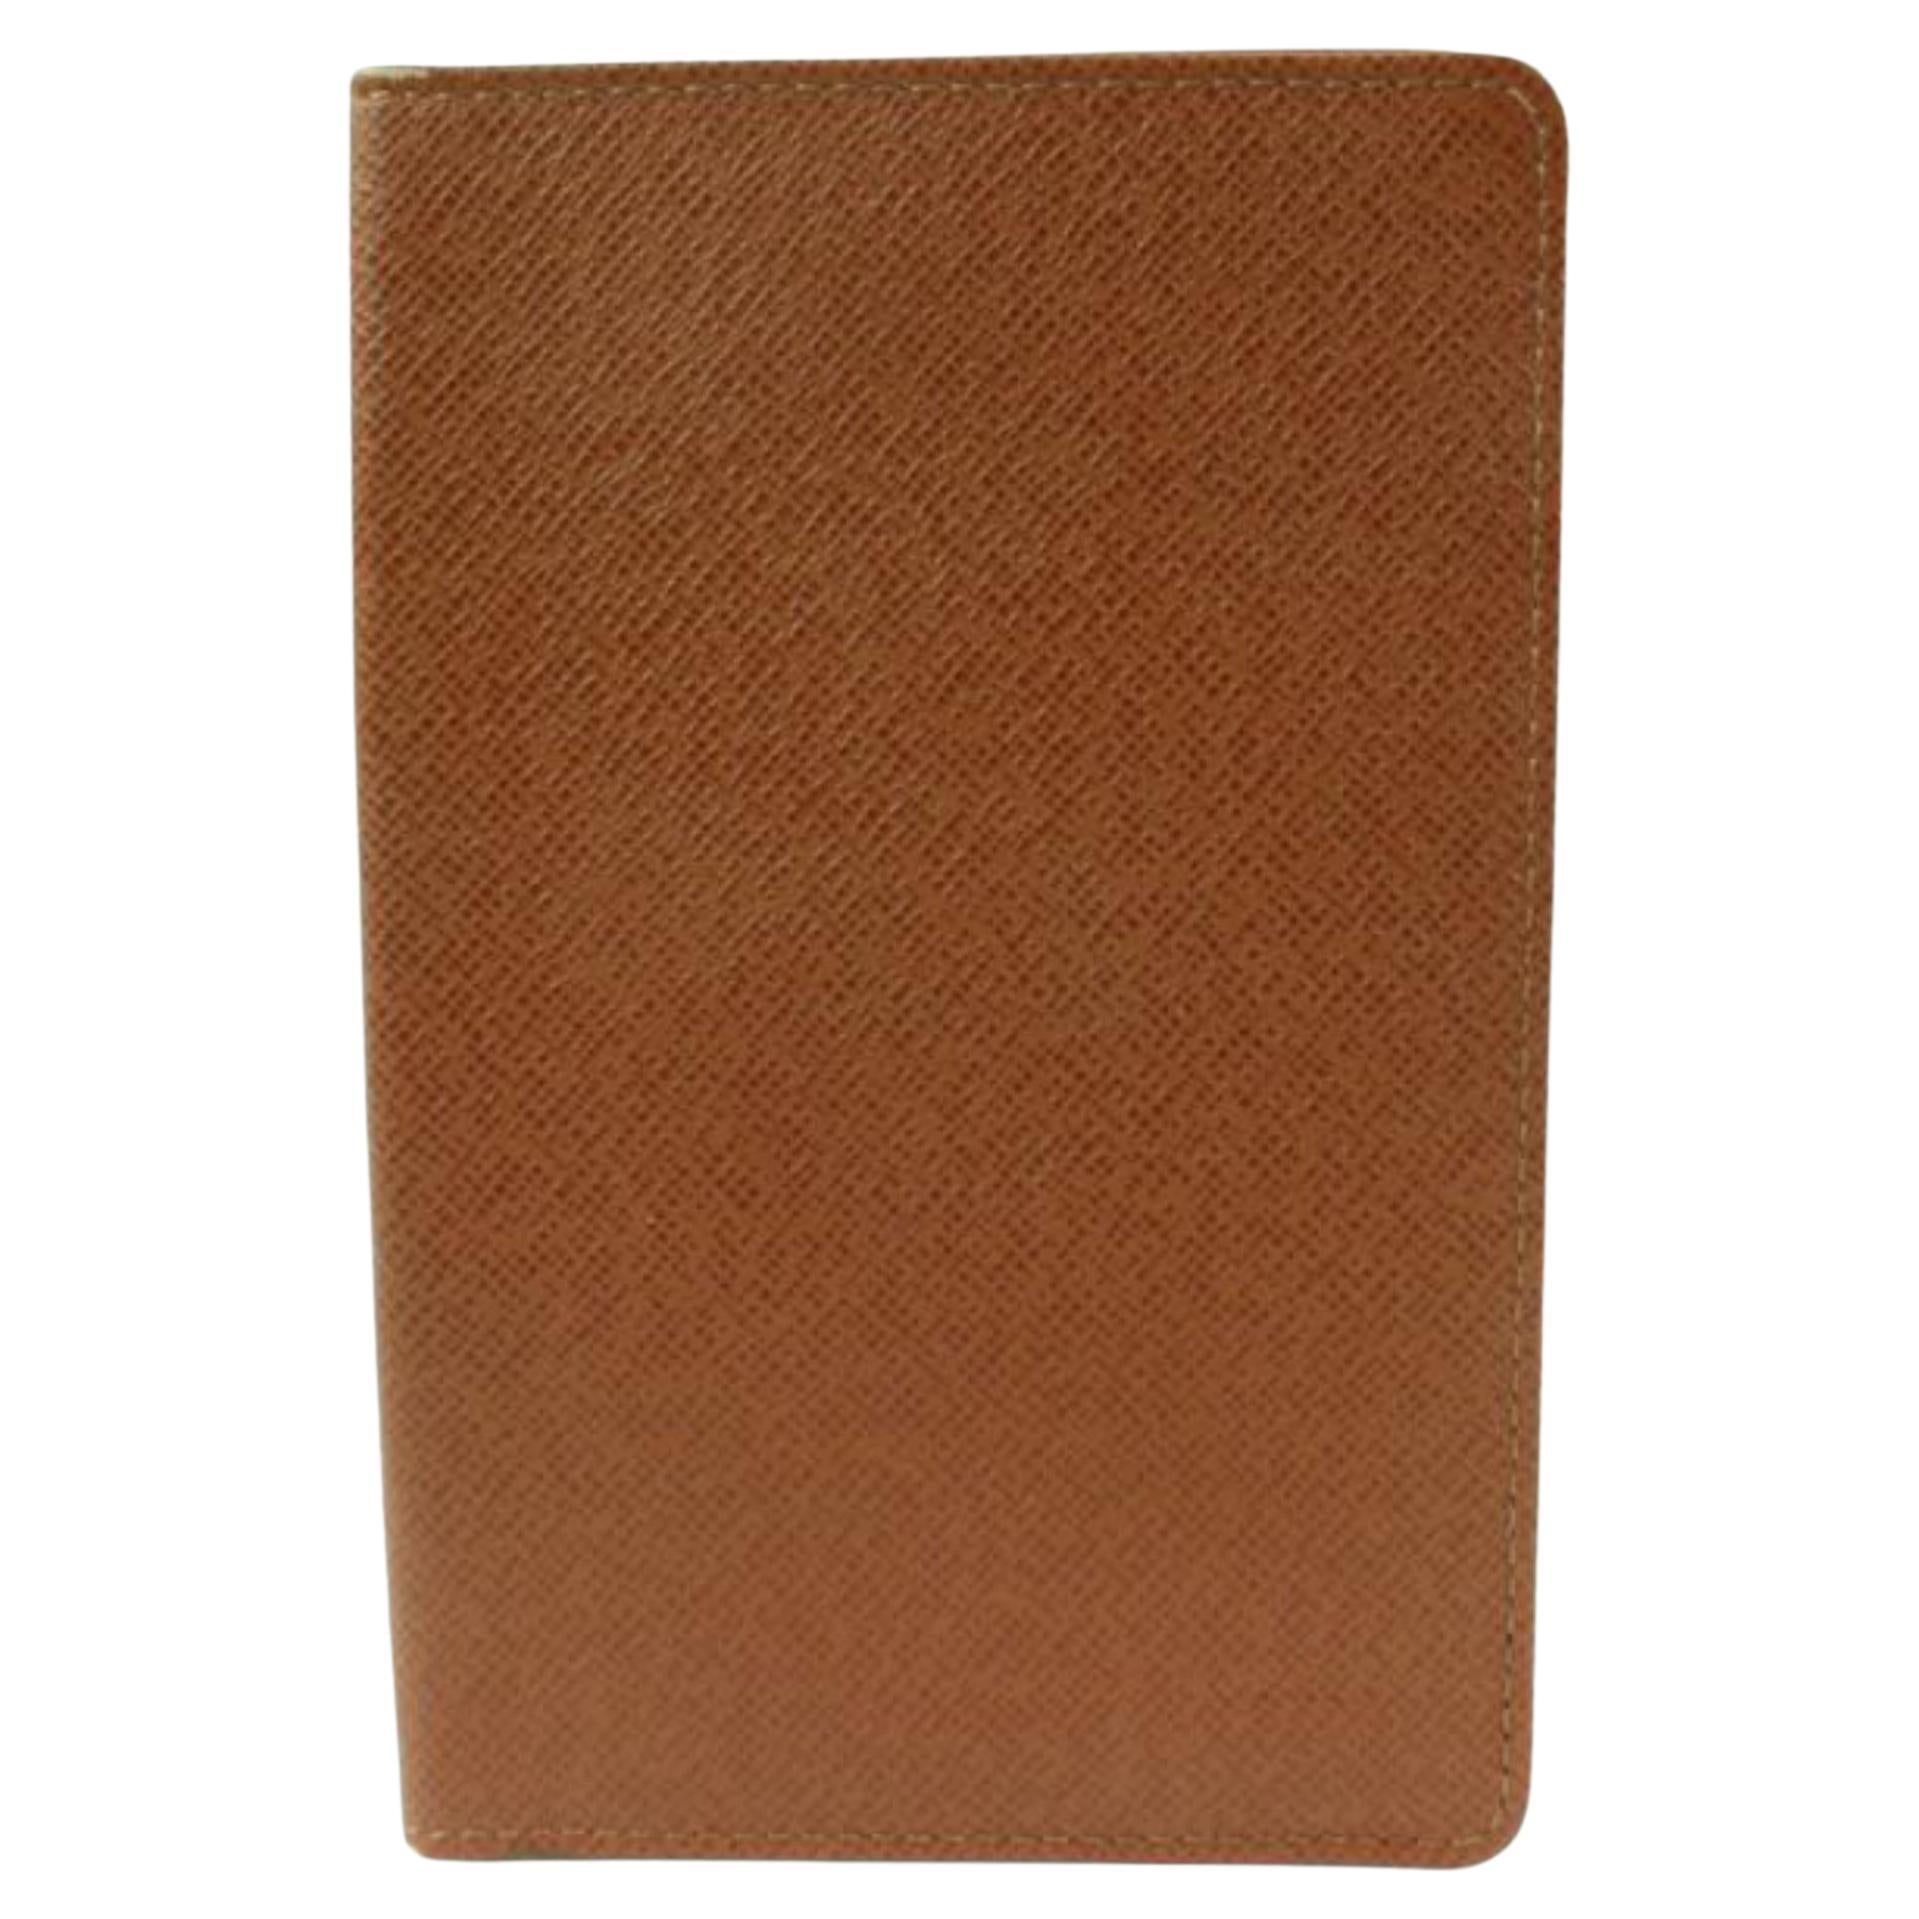 Louis Vuitton Brown Leather Card Holder ID Wallet Case 73lk33s